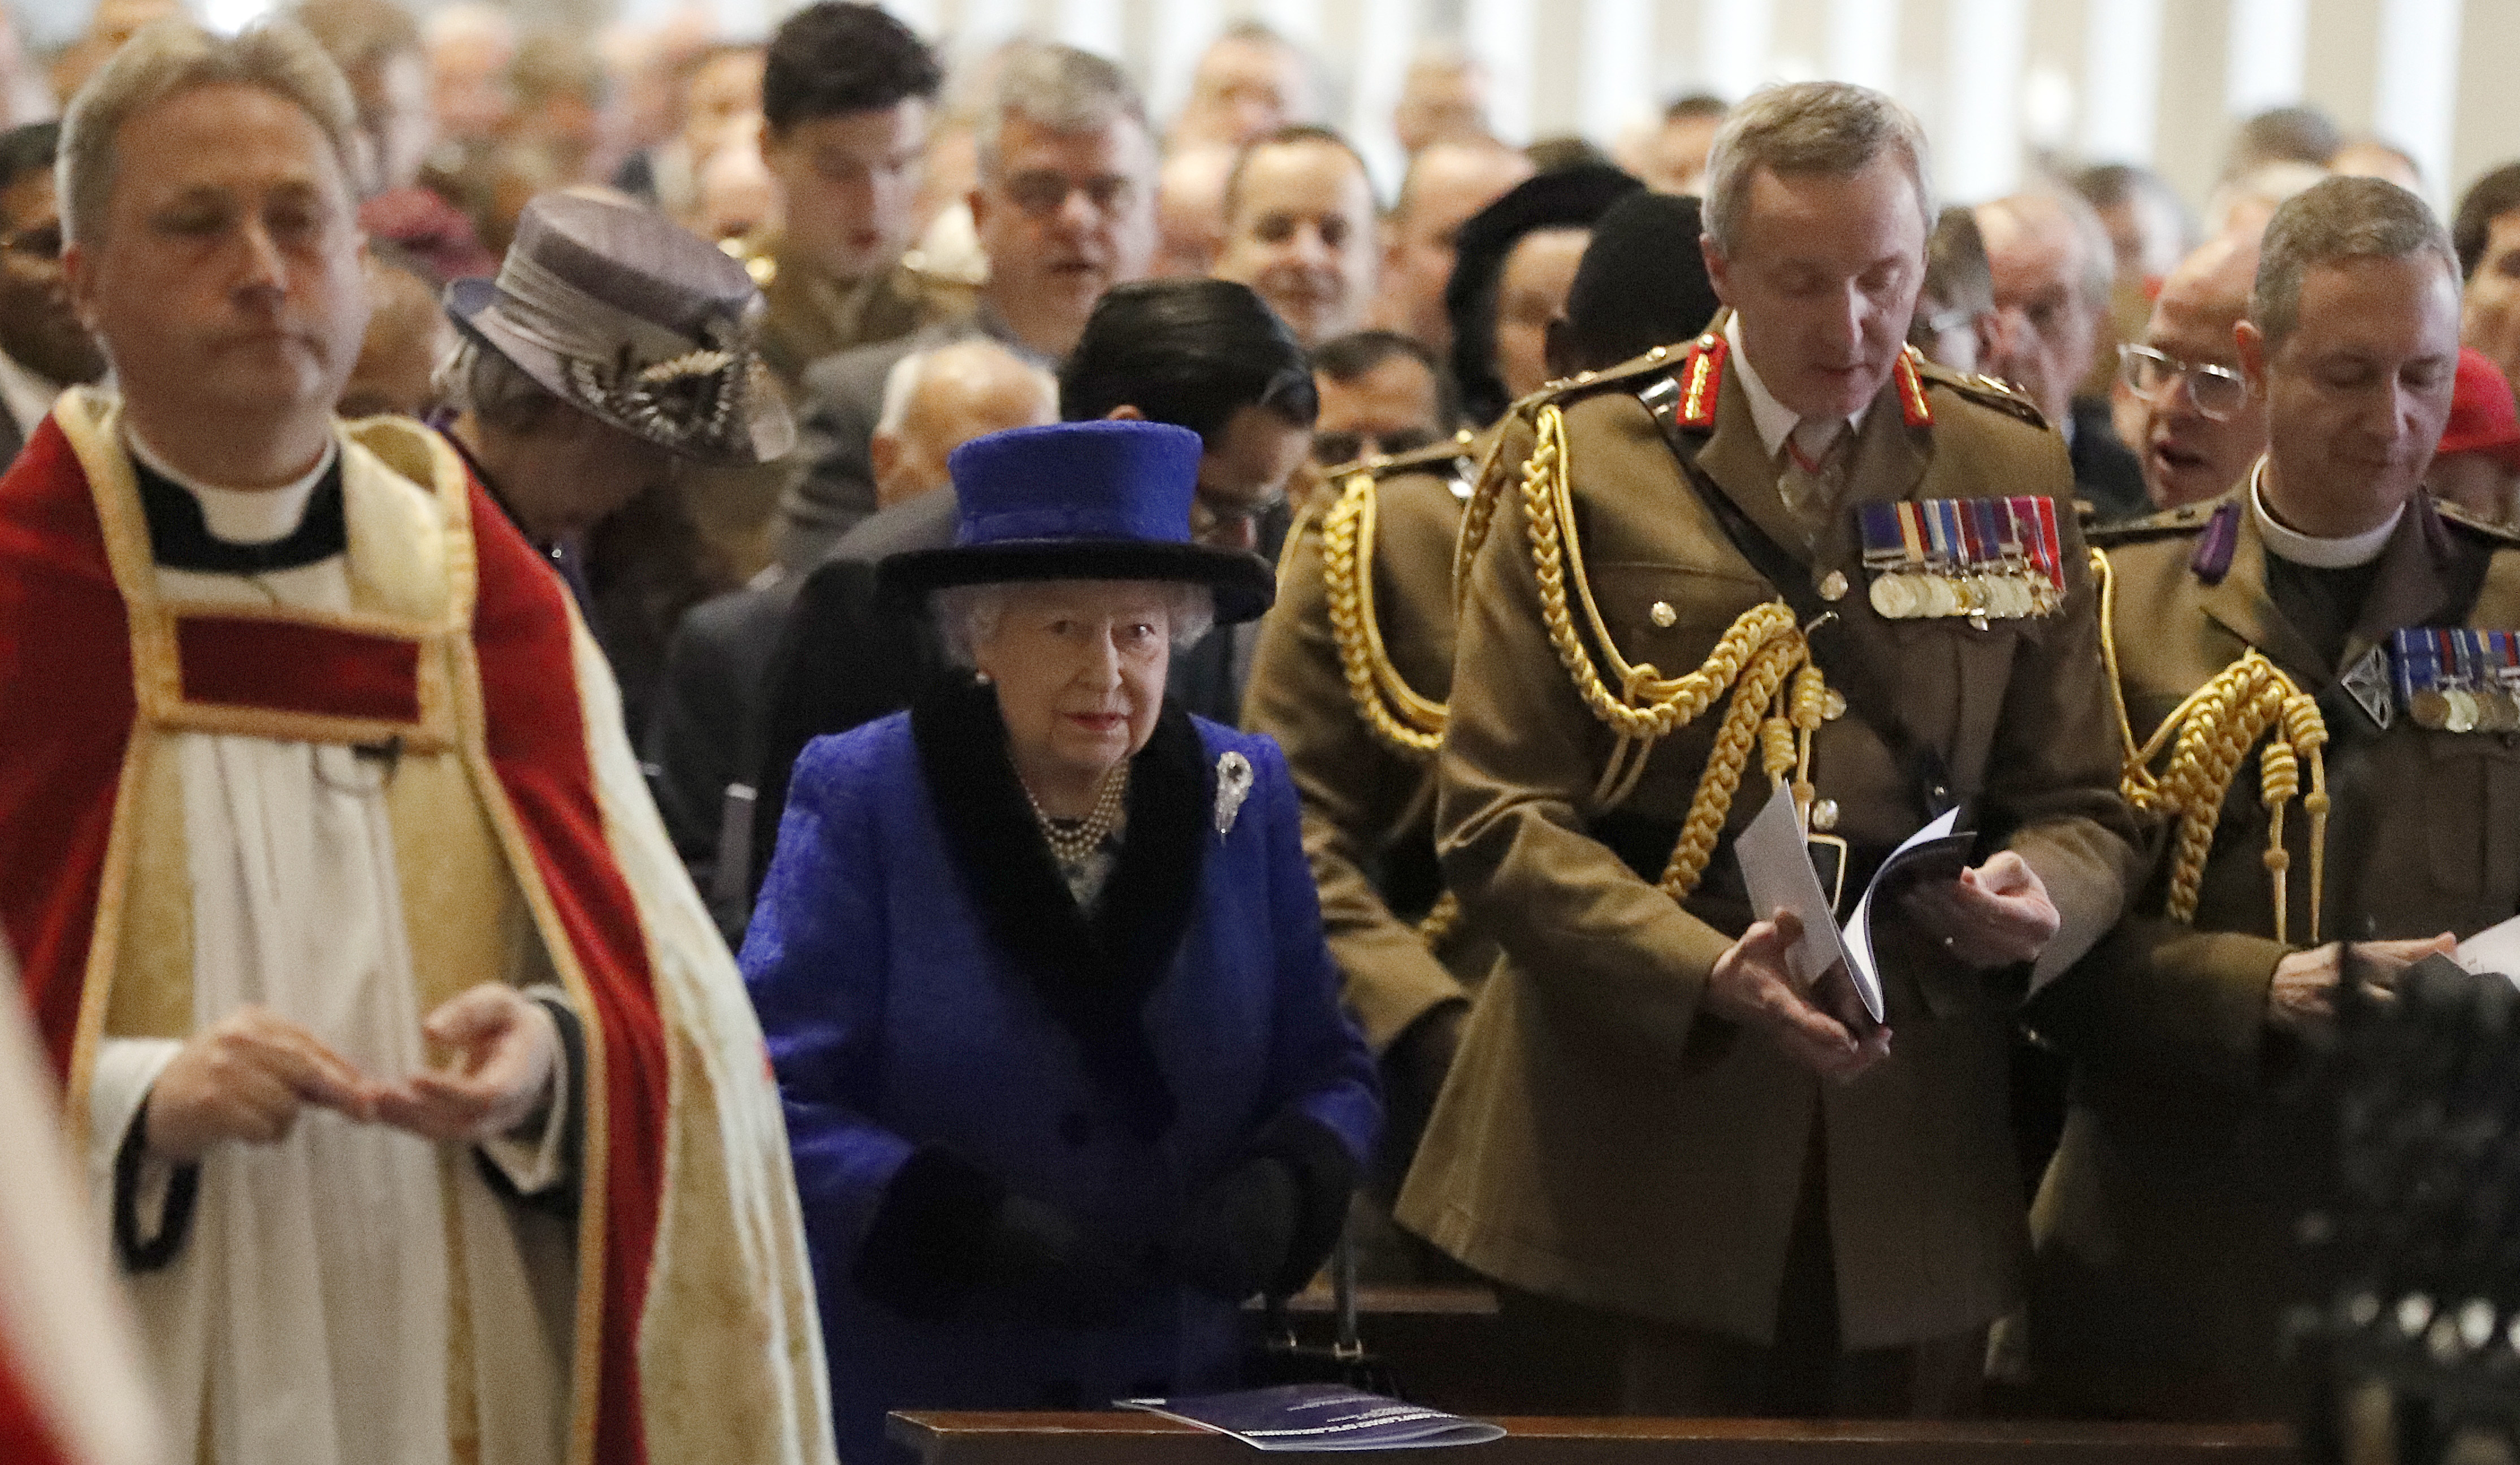 Queen Elizabeth II attends a service to celebrate the centenary of the granting by King George V of the prefix 'Royal' to the Royal Army Chaplains' Department, at the Guards' Chapel, Wellington Barracks, London.